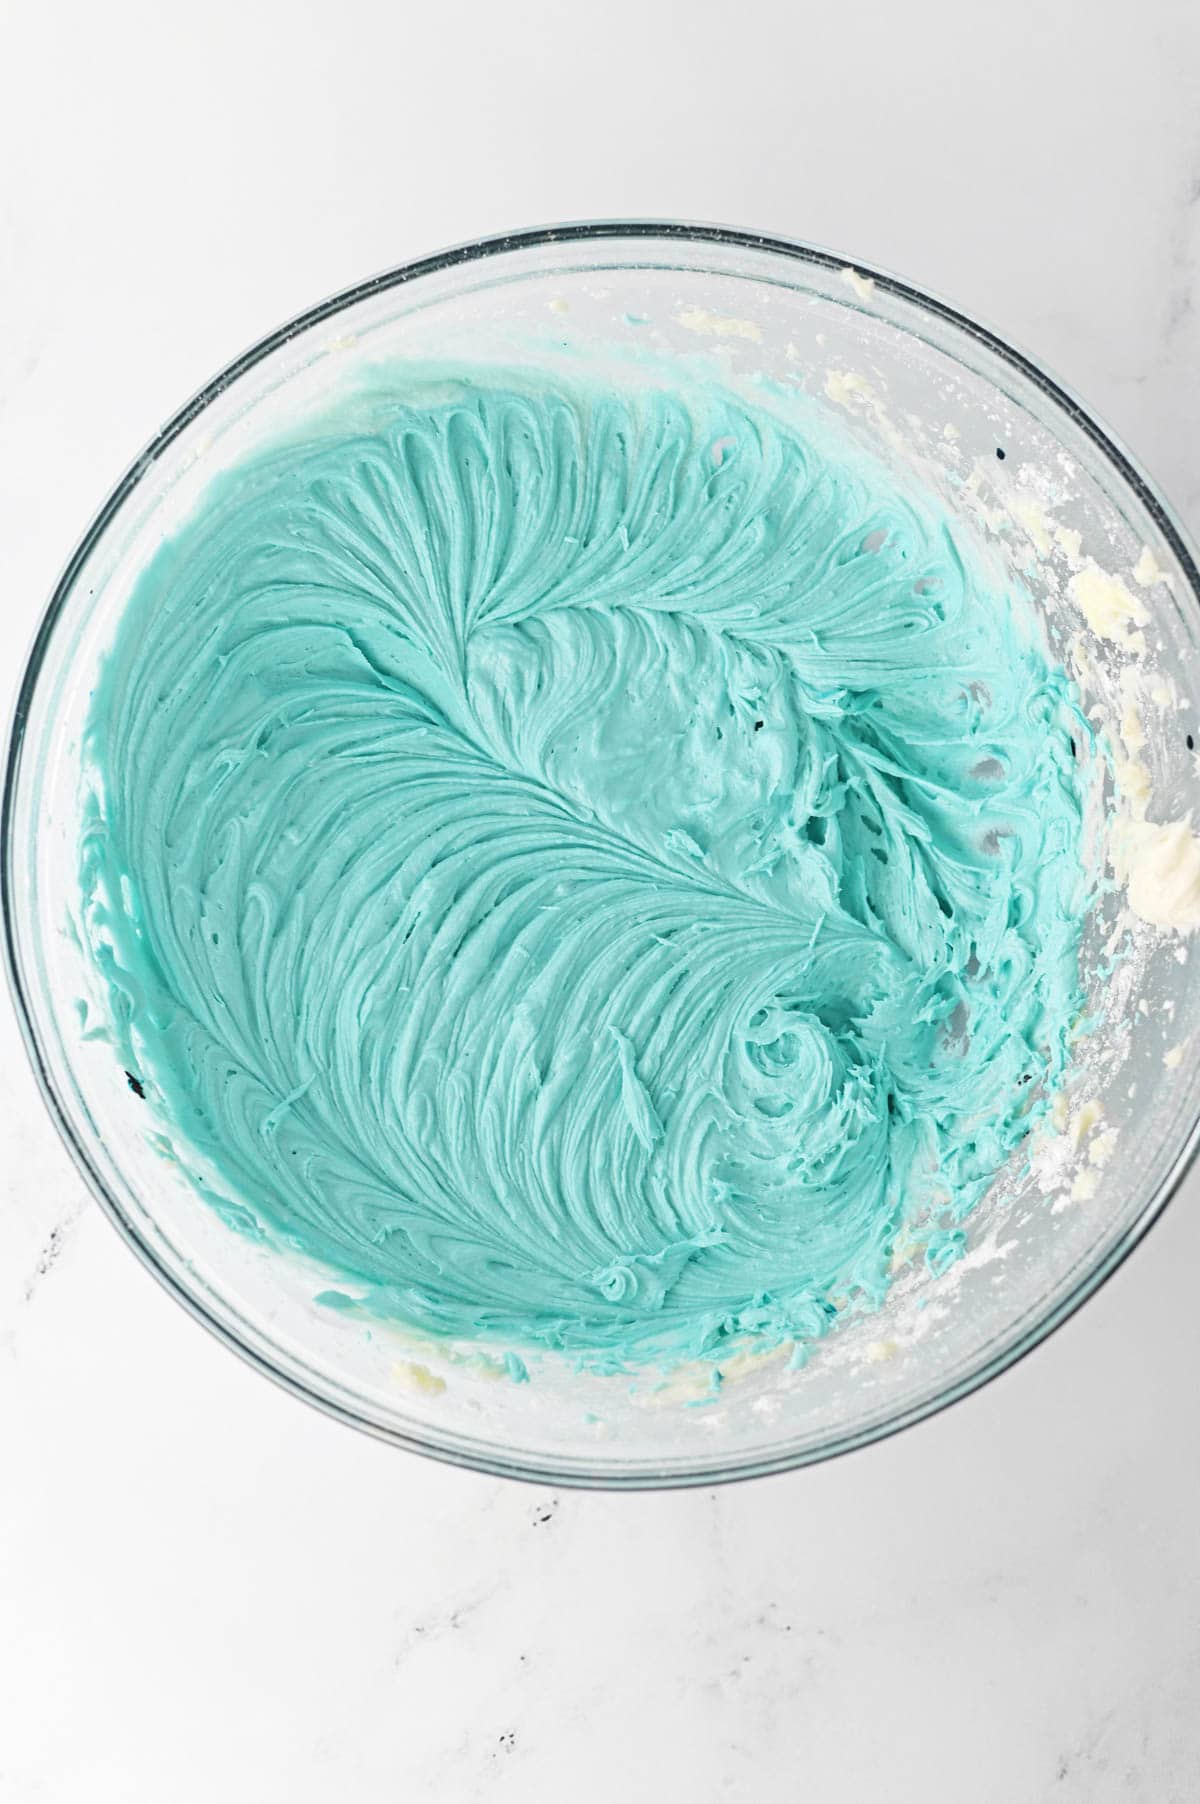 Blue icing in glass bowl